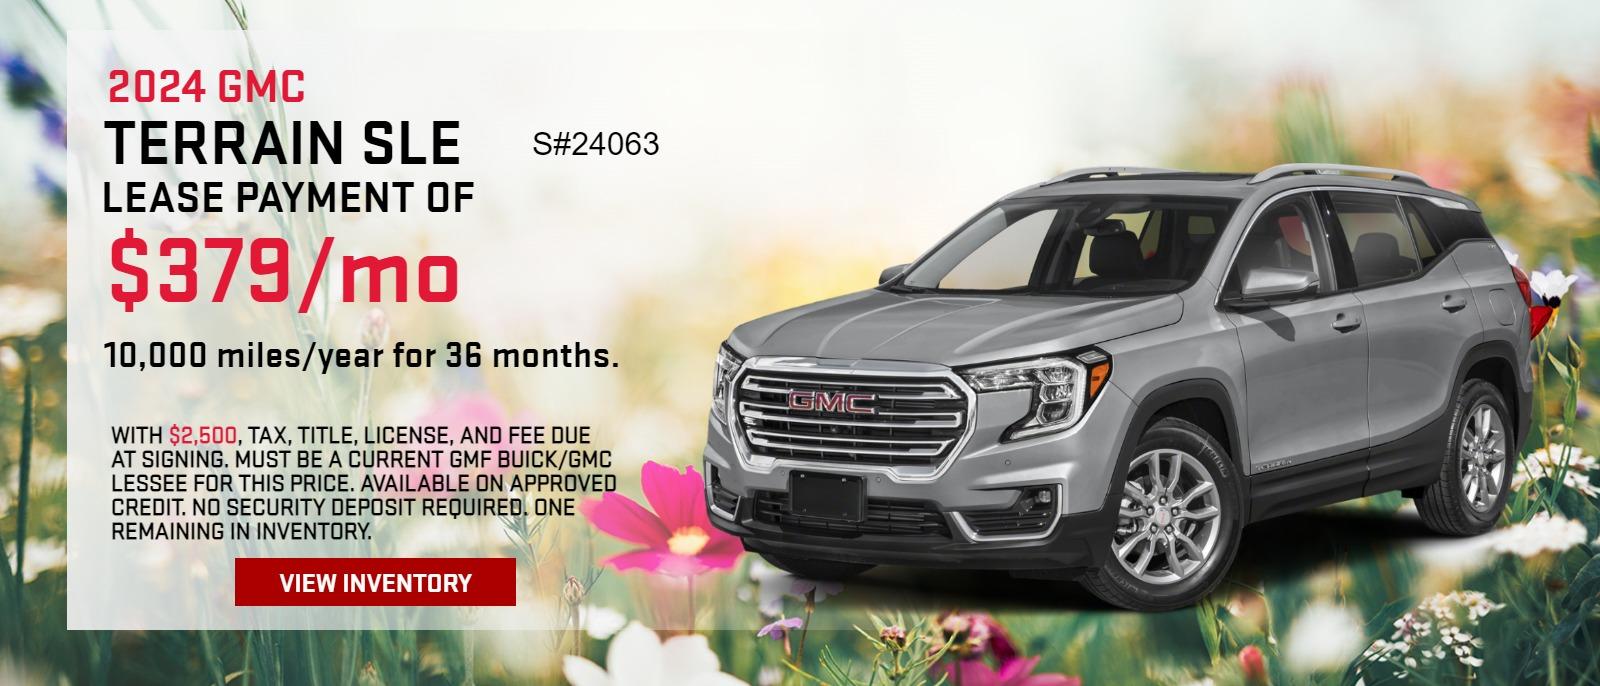 S#24063
2024 GMC TERRAIN
LEASE PAYMENT OF $394/MO 
WITH $2500, TAX, TITLE, LICENSE, AND FEE DUE AT SIGNING. MUST BE A CURRENT GMF BUICK/GMC LESSEE FOR THIS PRICE. MUST TAKE DELIVERY BY 4/30/24